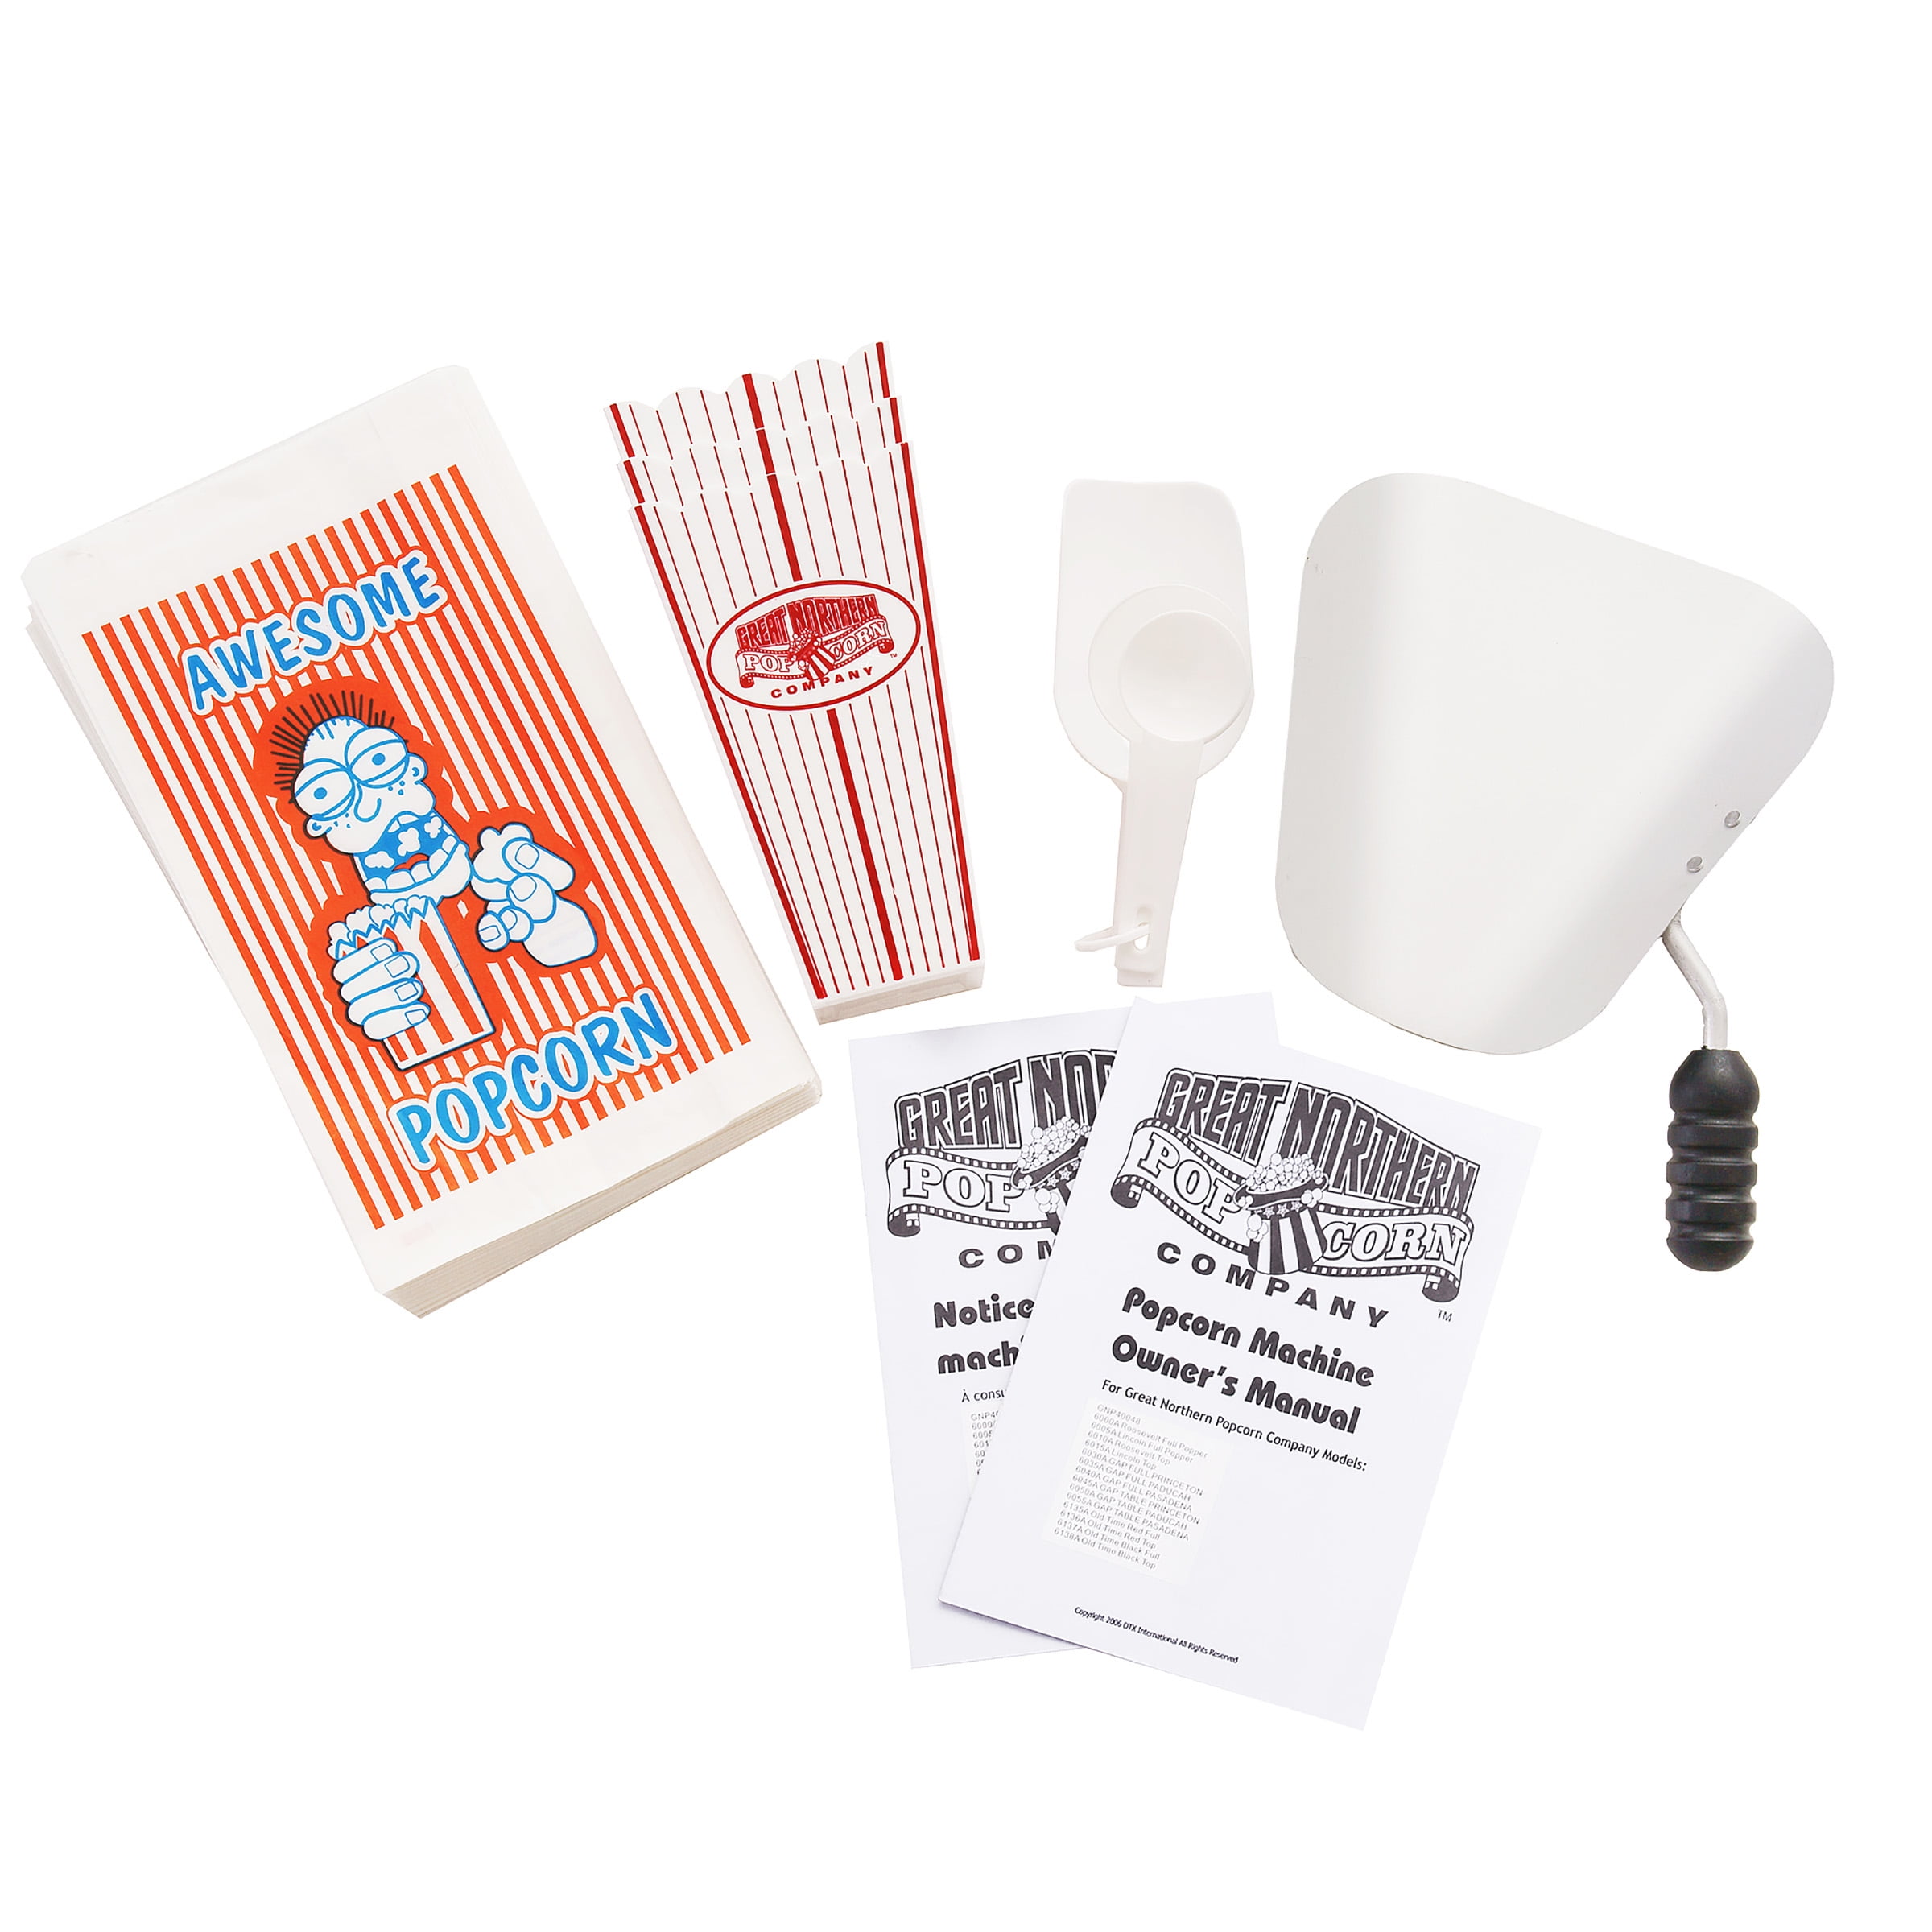 Popcorn Equipment Accessories & Supplies Starter Package for a 4